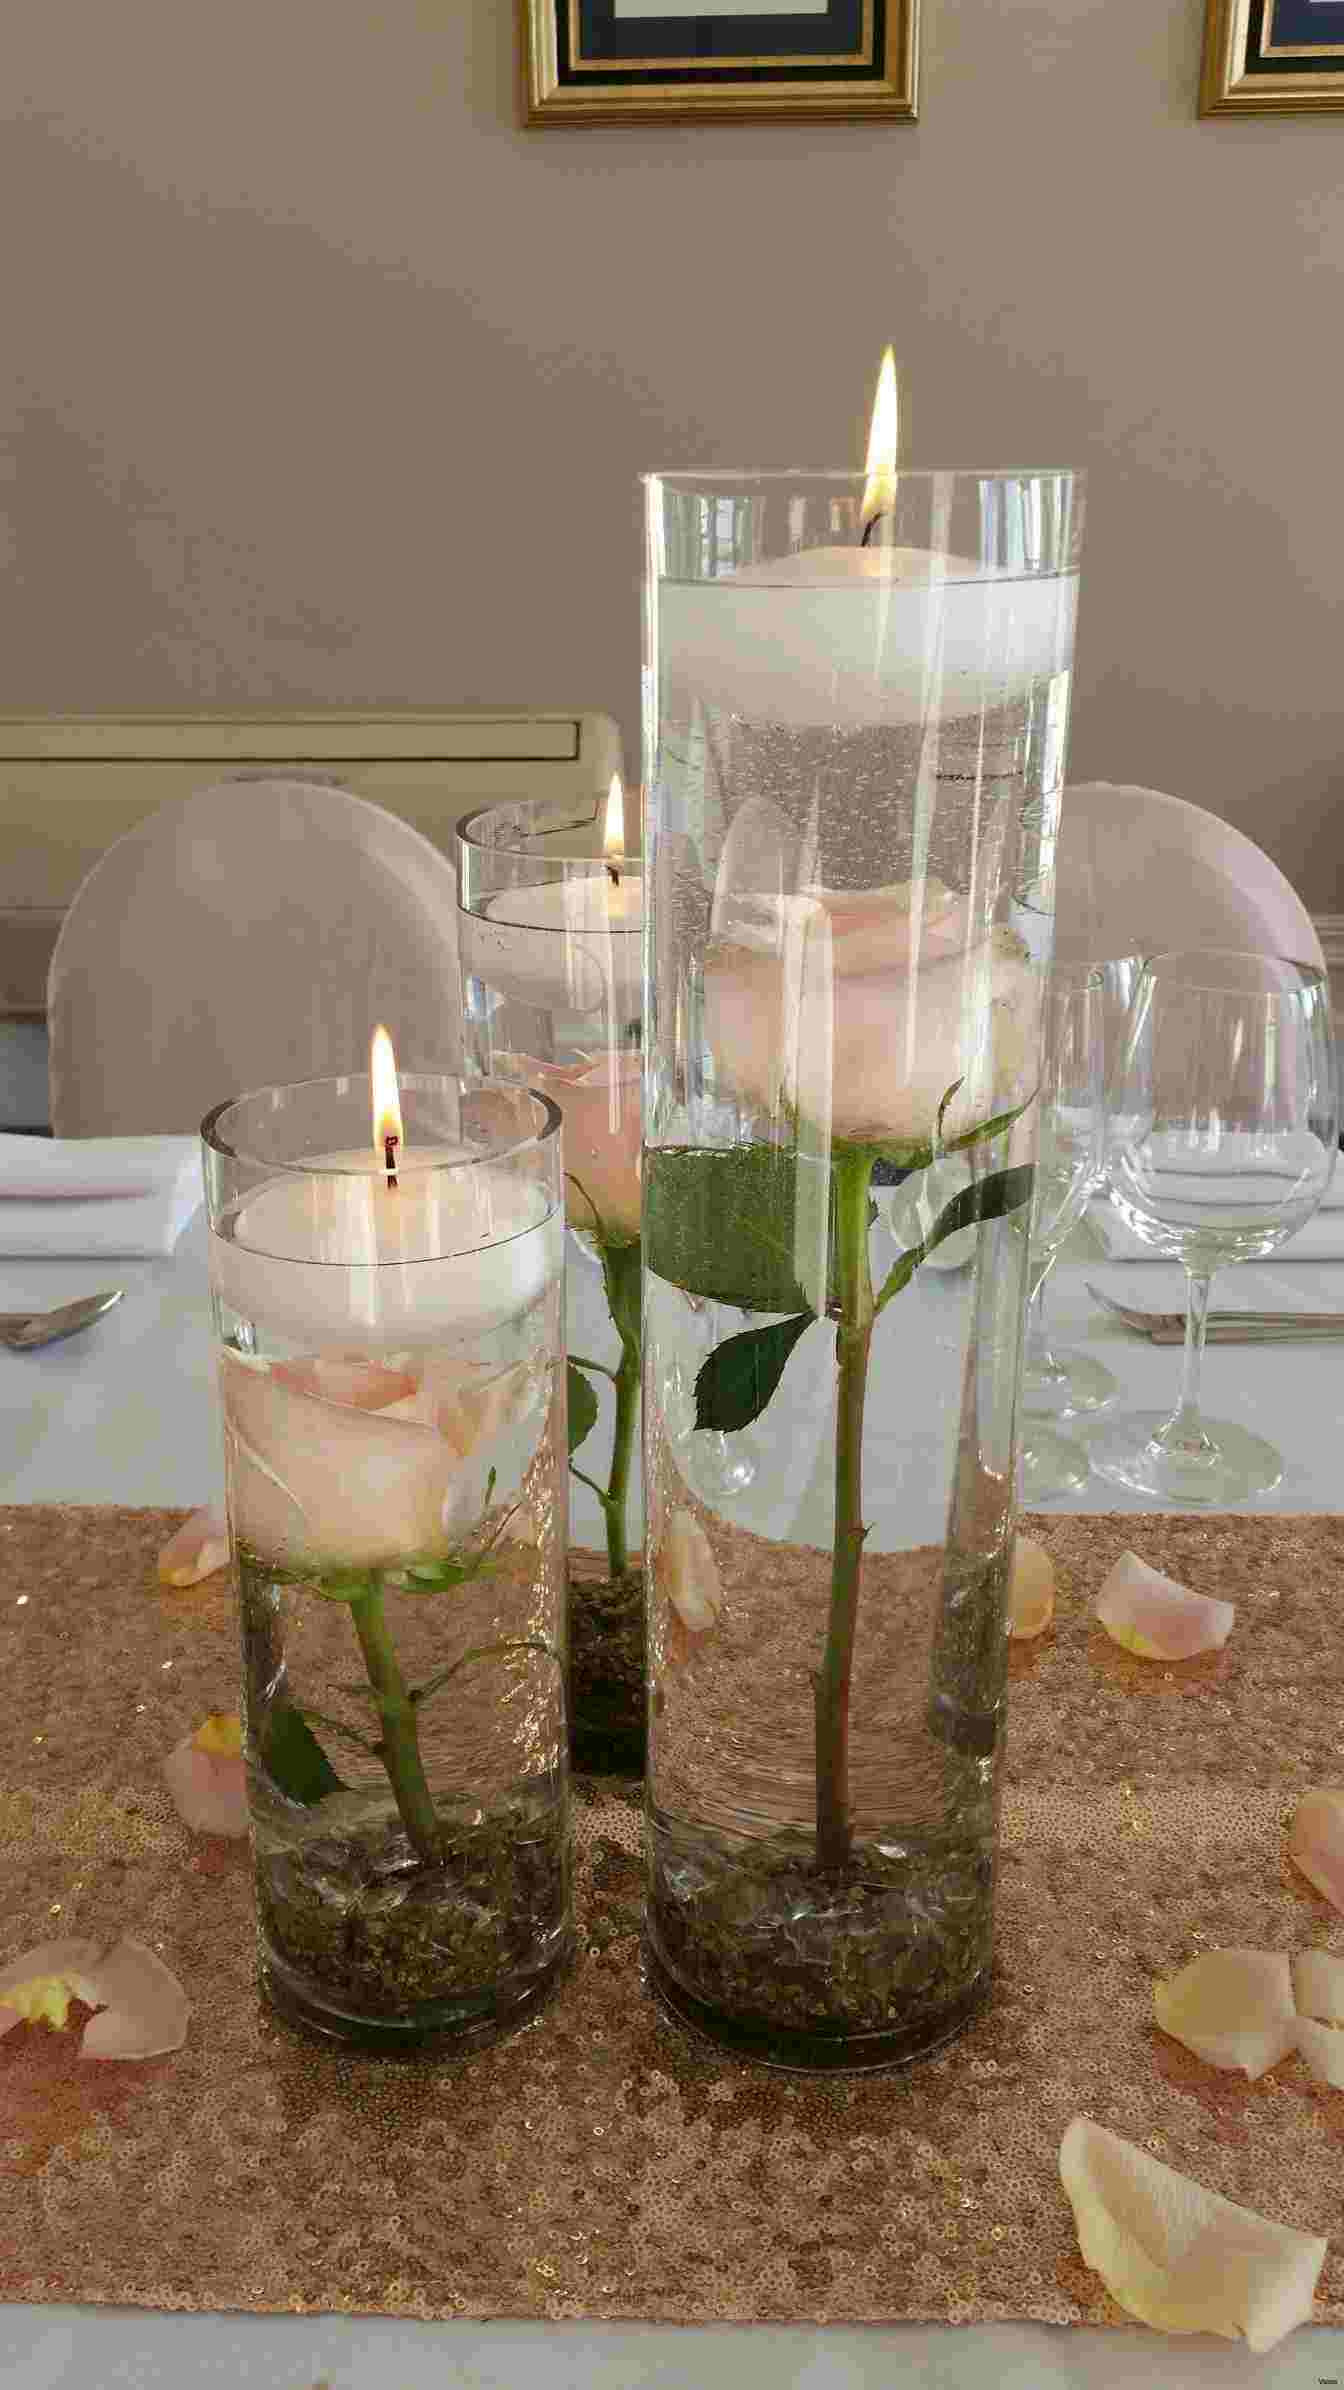 30 Awesome Libbey 6 Inch Cylinder Vase 2024 free download libbey 6 inch cylinder vase of pics of glass cylinder vase centerpiece ideas vases artificial pertaining to glass cylinder vase centerpiece ideas stock floating candles decoration fresh unti